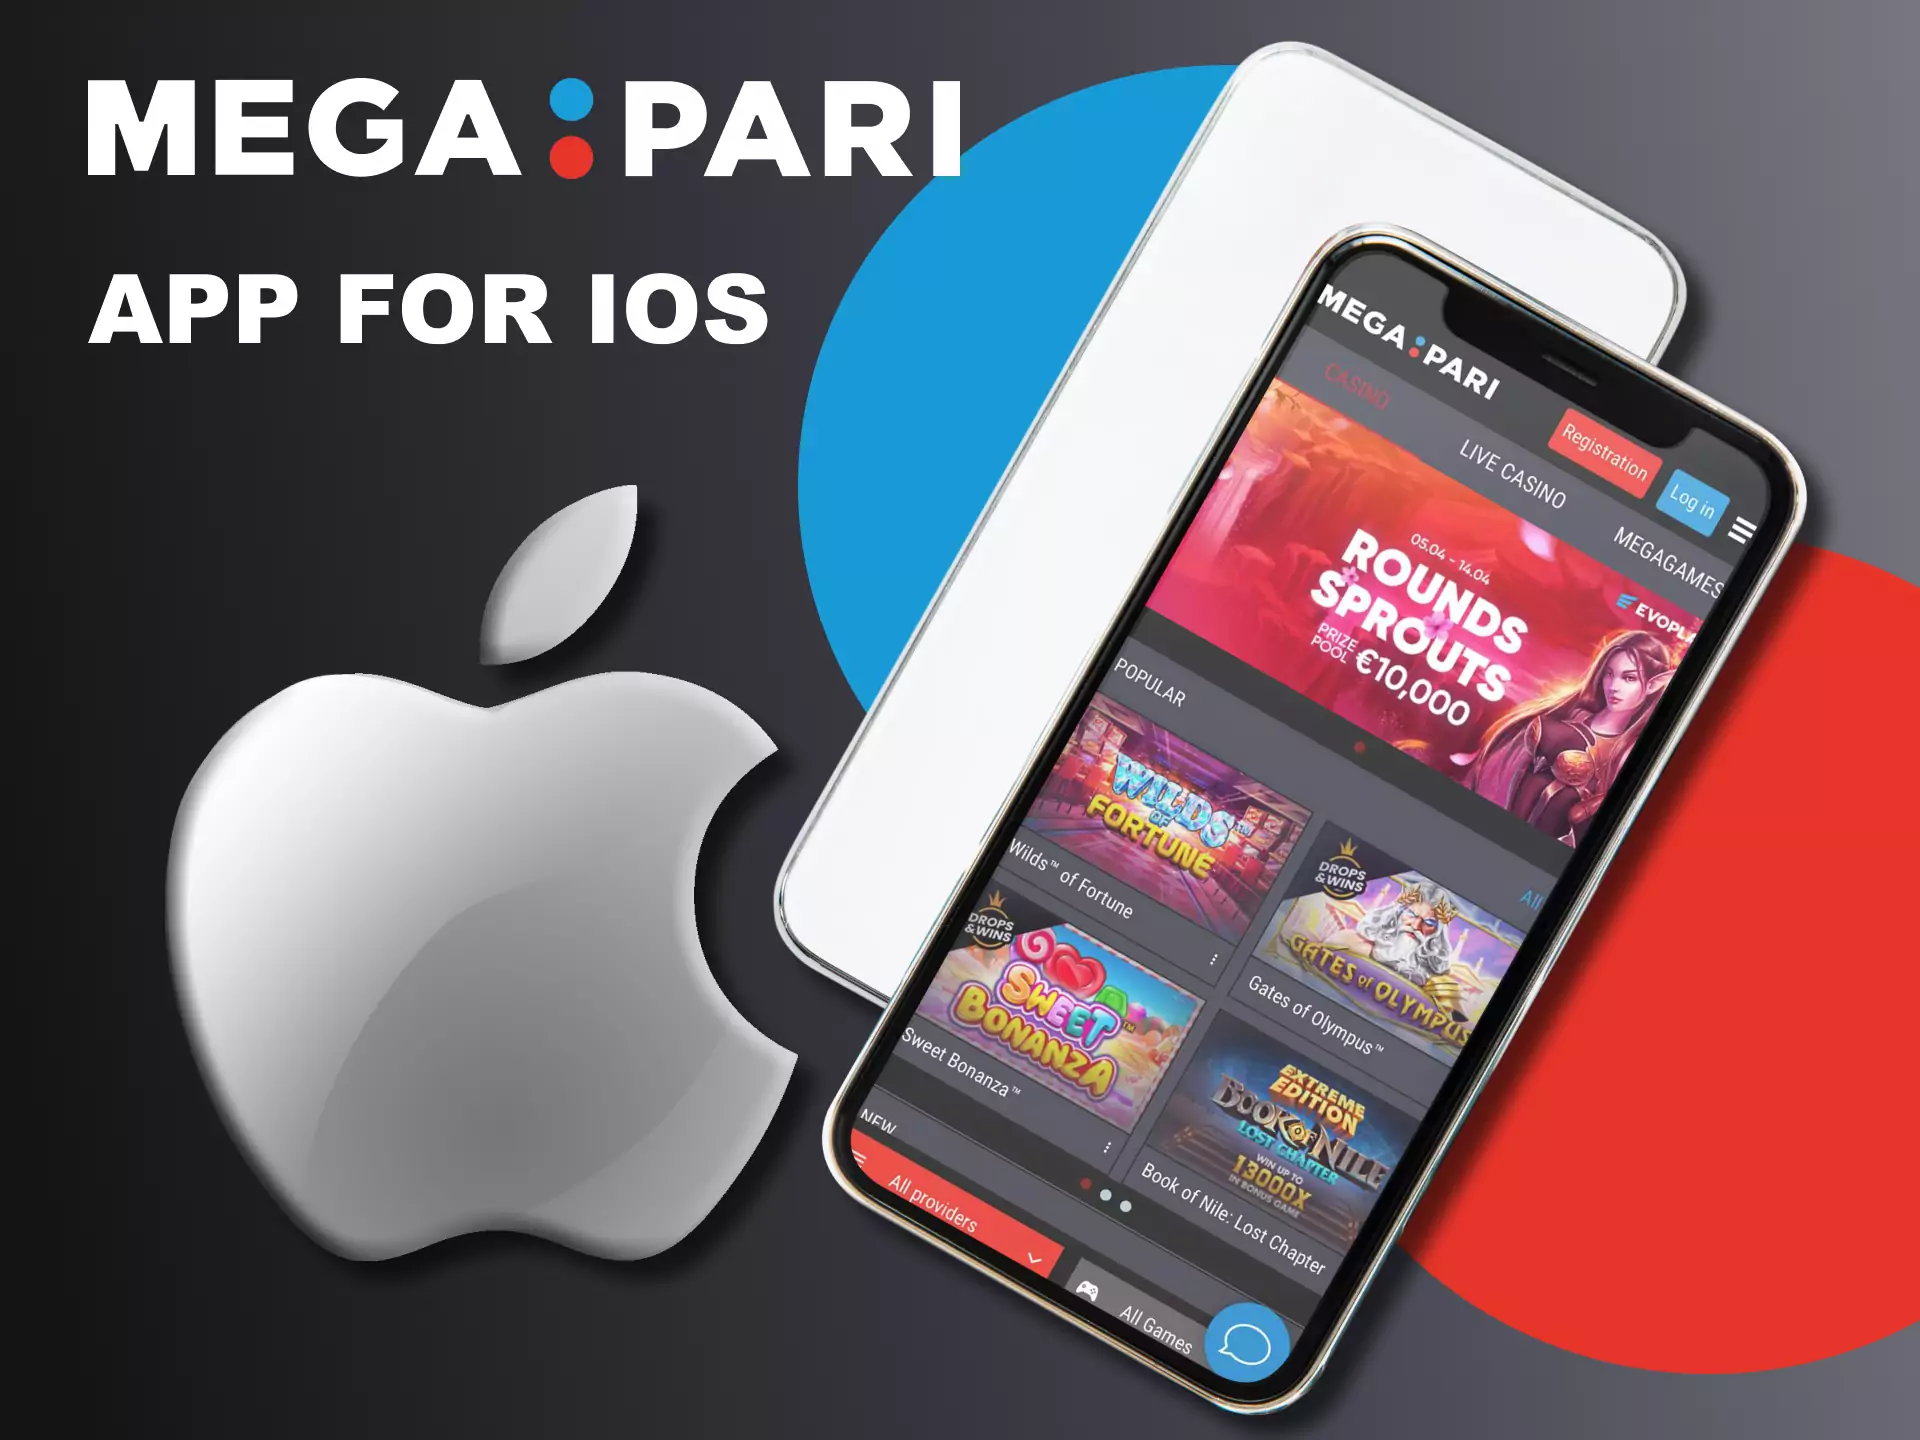 The Megapari app can be easily installed on your iOS device.